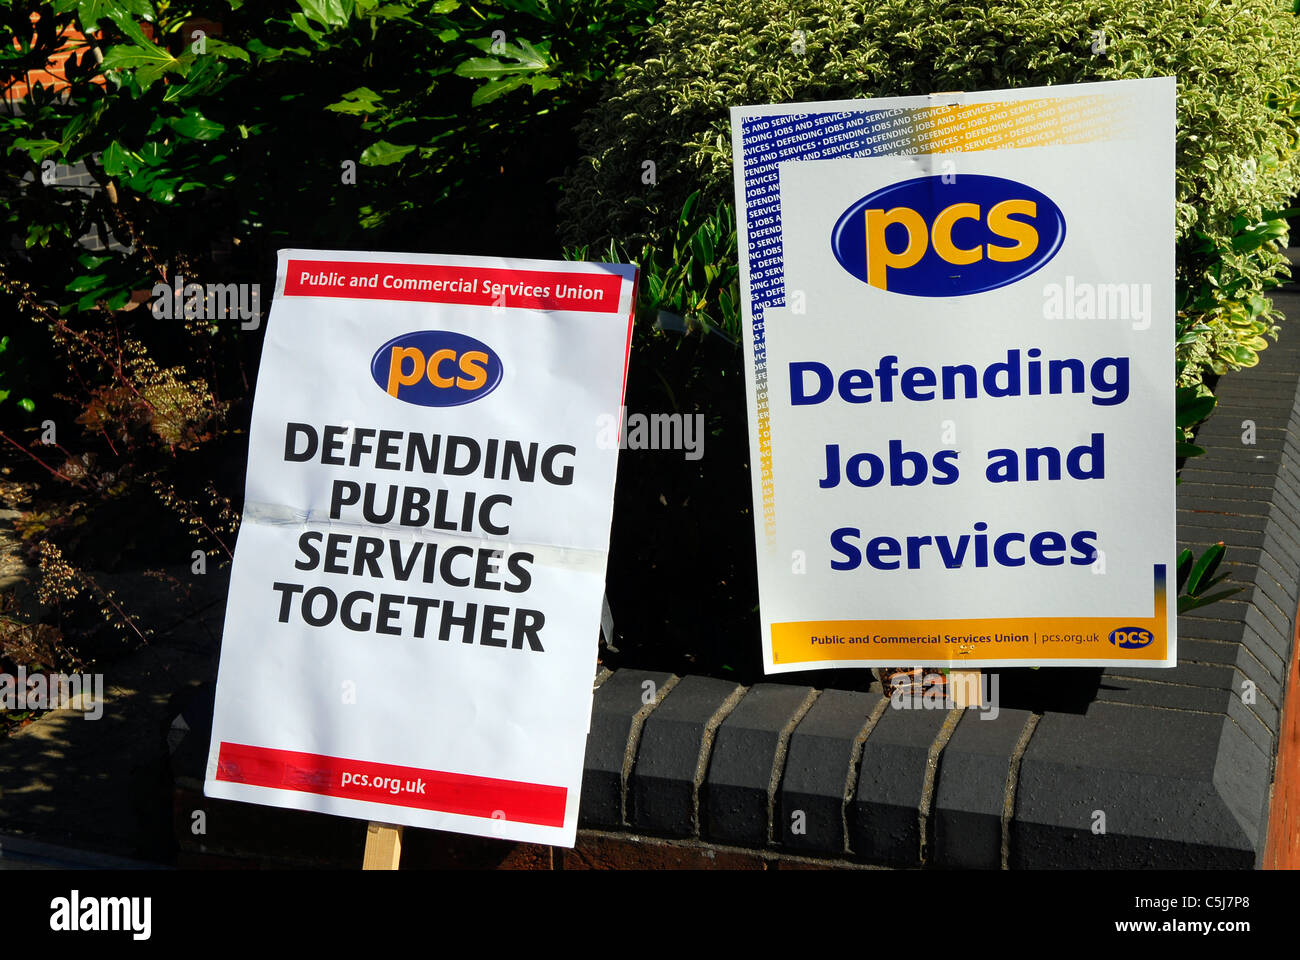 PCS placards on picket line during strikes against public sector cuts, Southampton, Hampshire, UK. 30 June 2011. Stock Photo